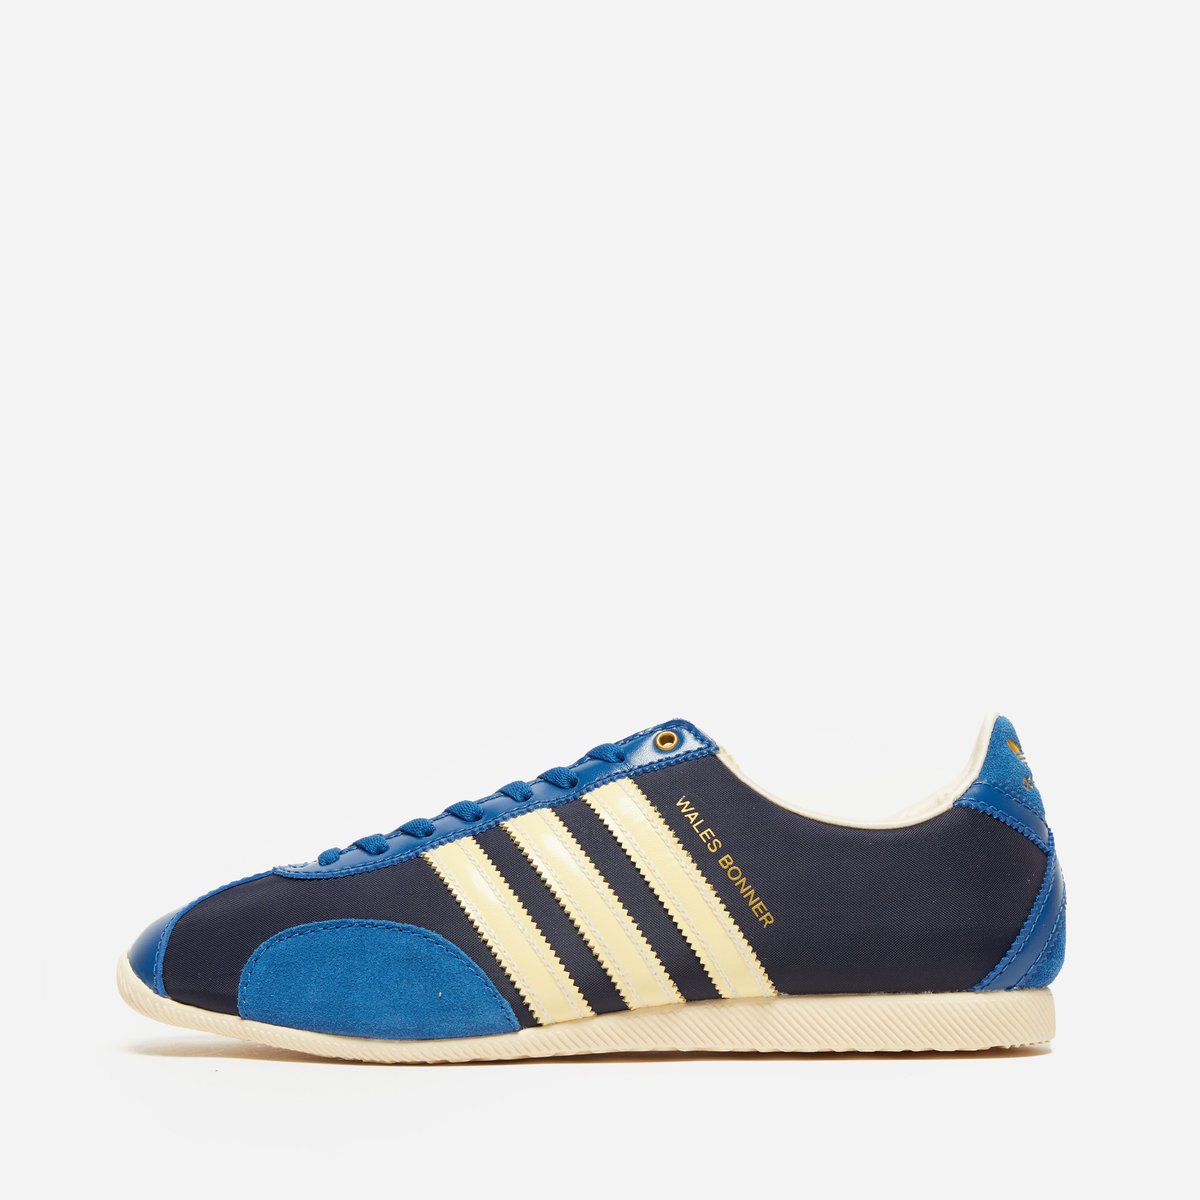 BE QUICK - Limited sizes available in the adidas Originals by Wales Bonner Navy colour-way online 👇 bit.ly/35sfVD1 #HIP #adidasOriginals #WalesBonner